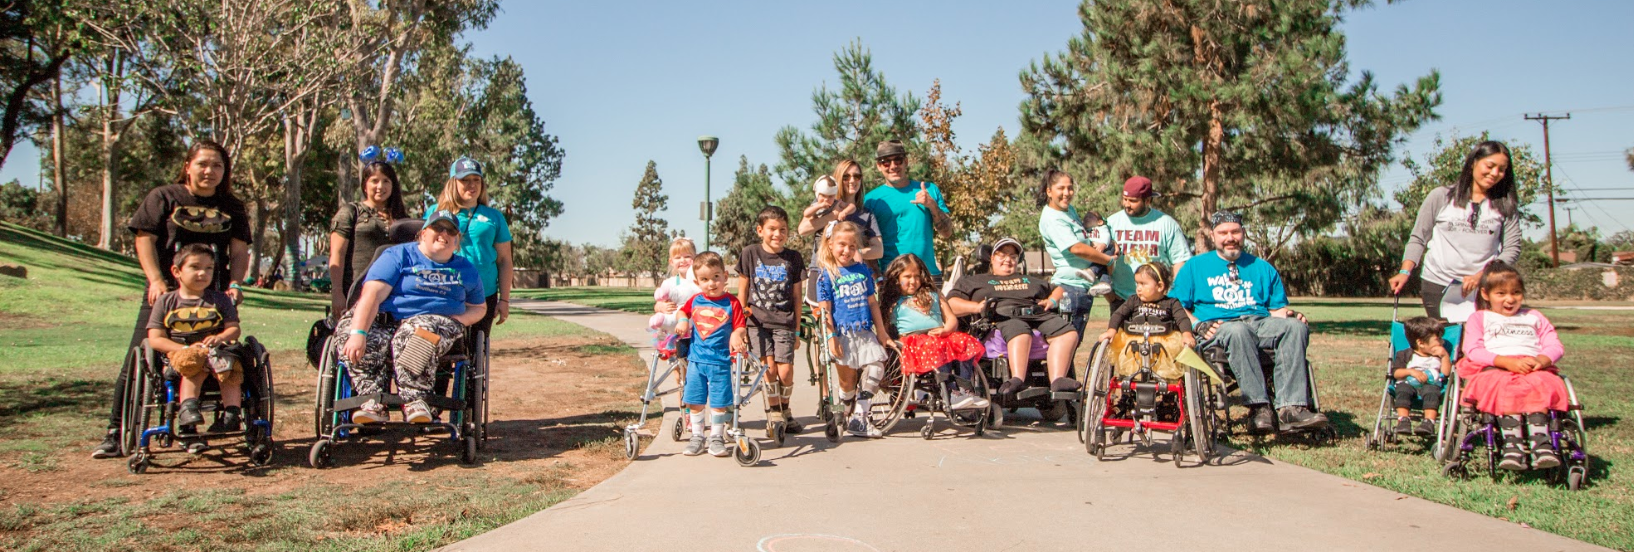 Group of diverse people with Spina Bifida